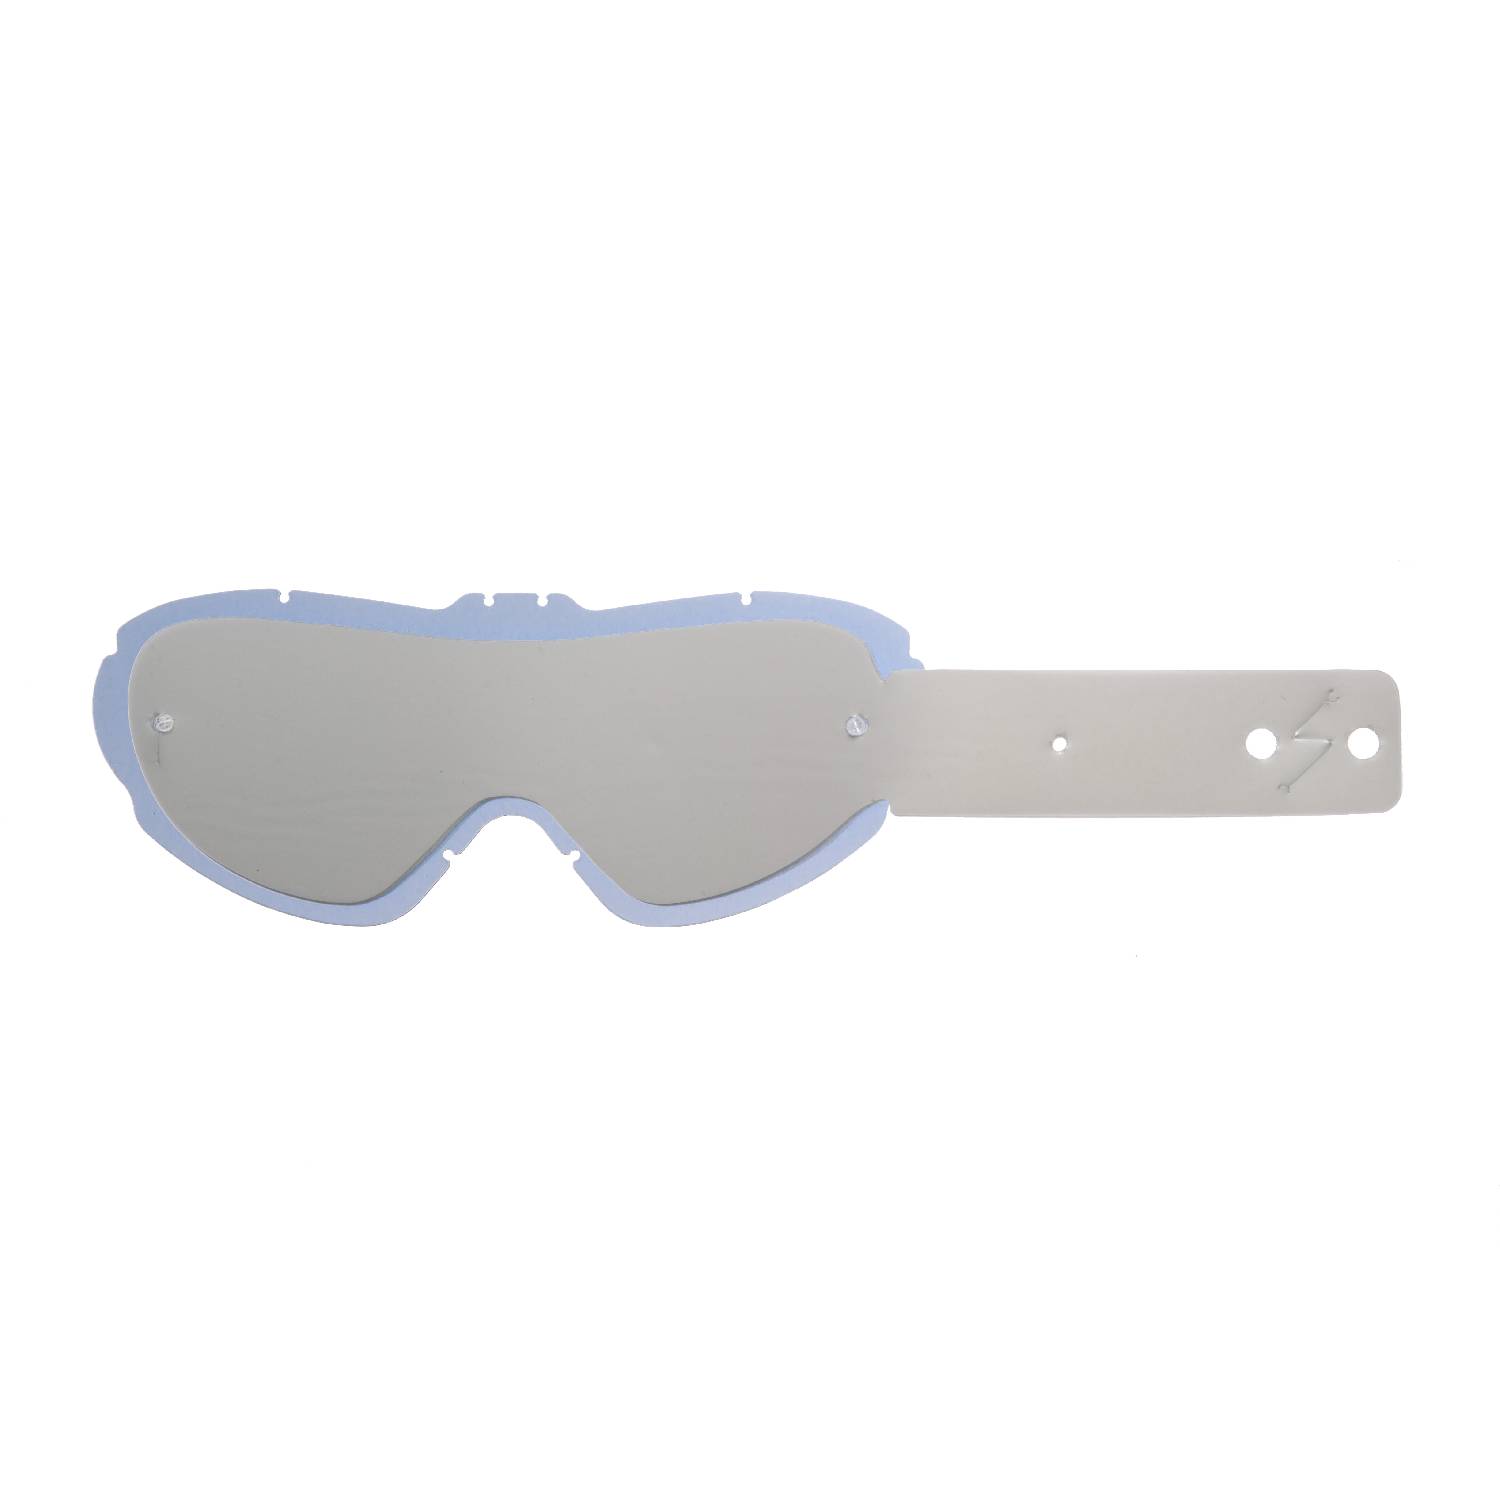 combo lenses with smokey lenses with 10 tear off compatible for Scott Hi voltage work goggle